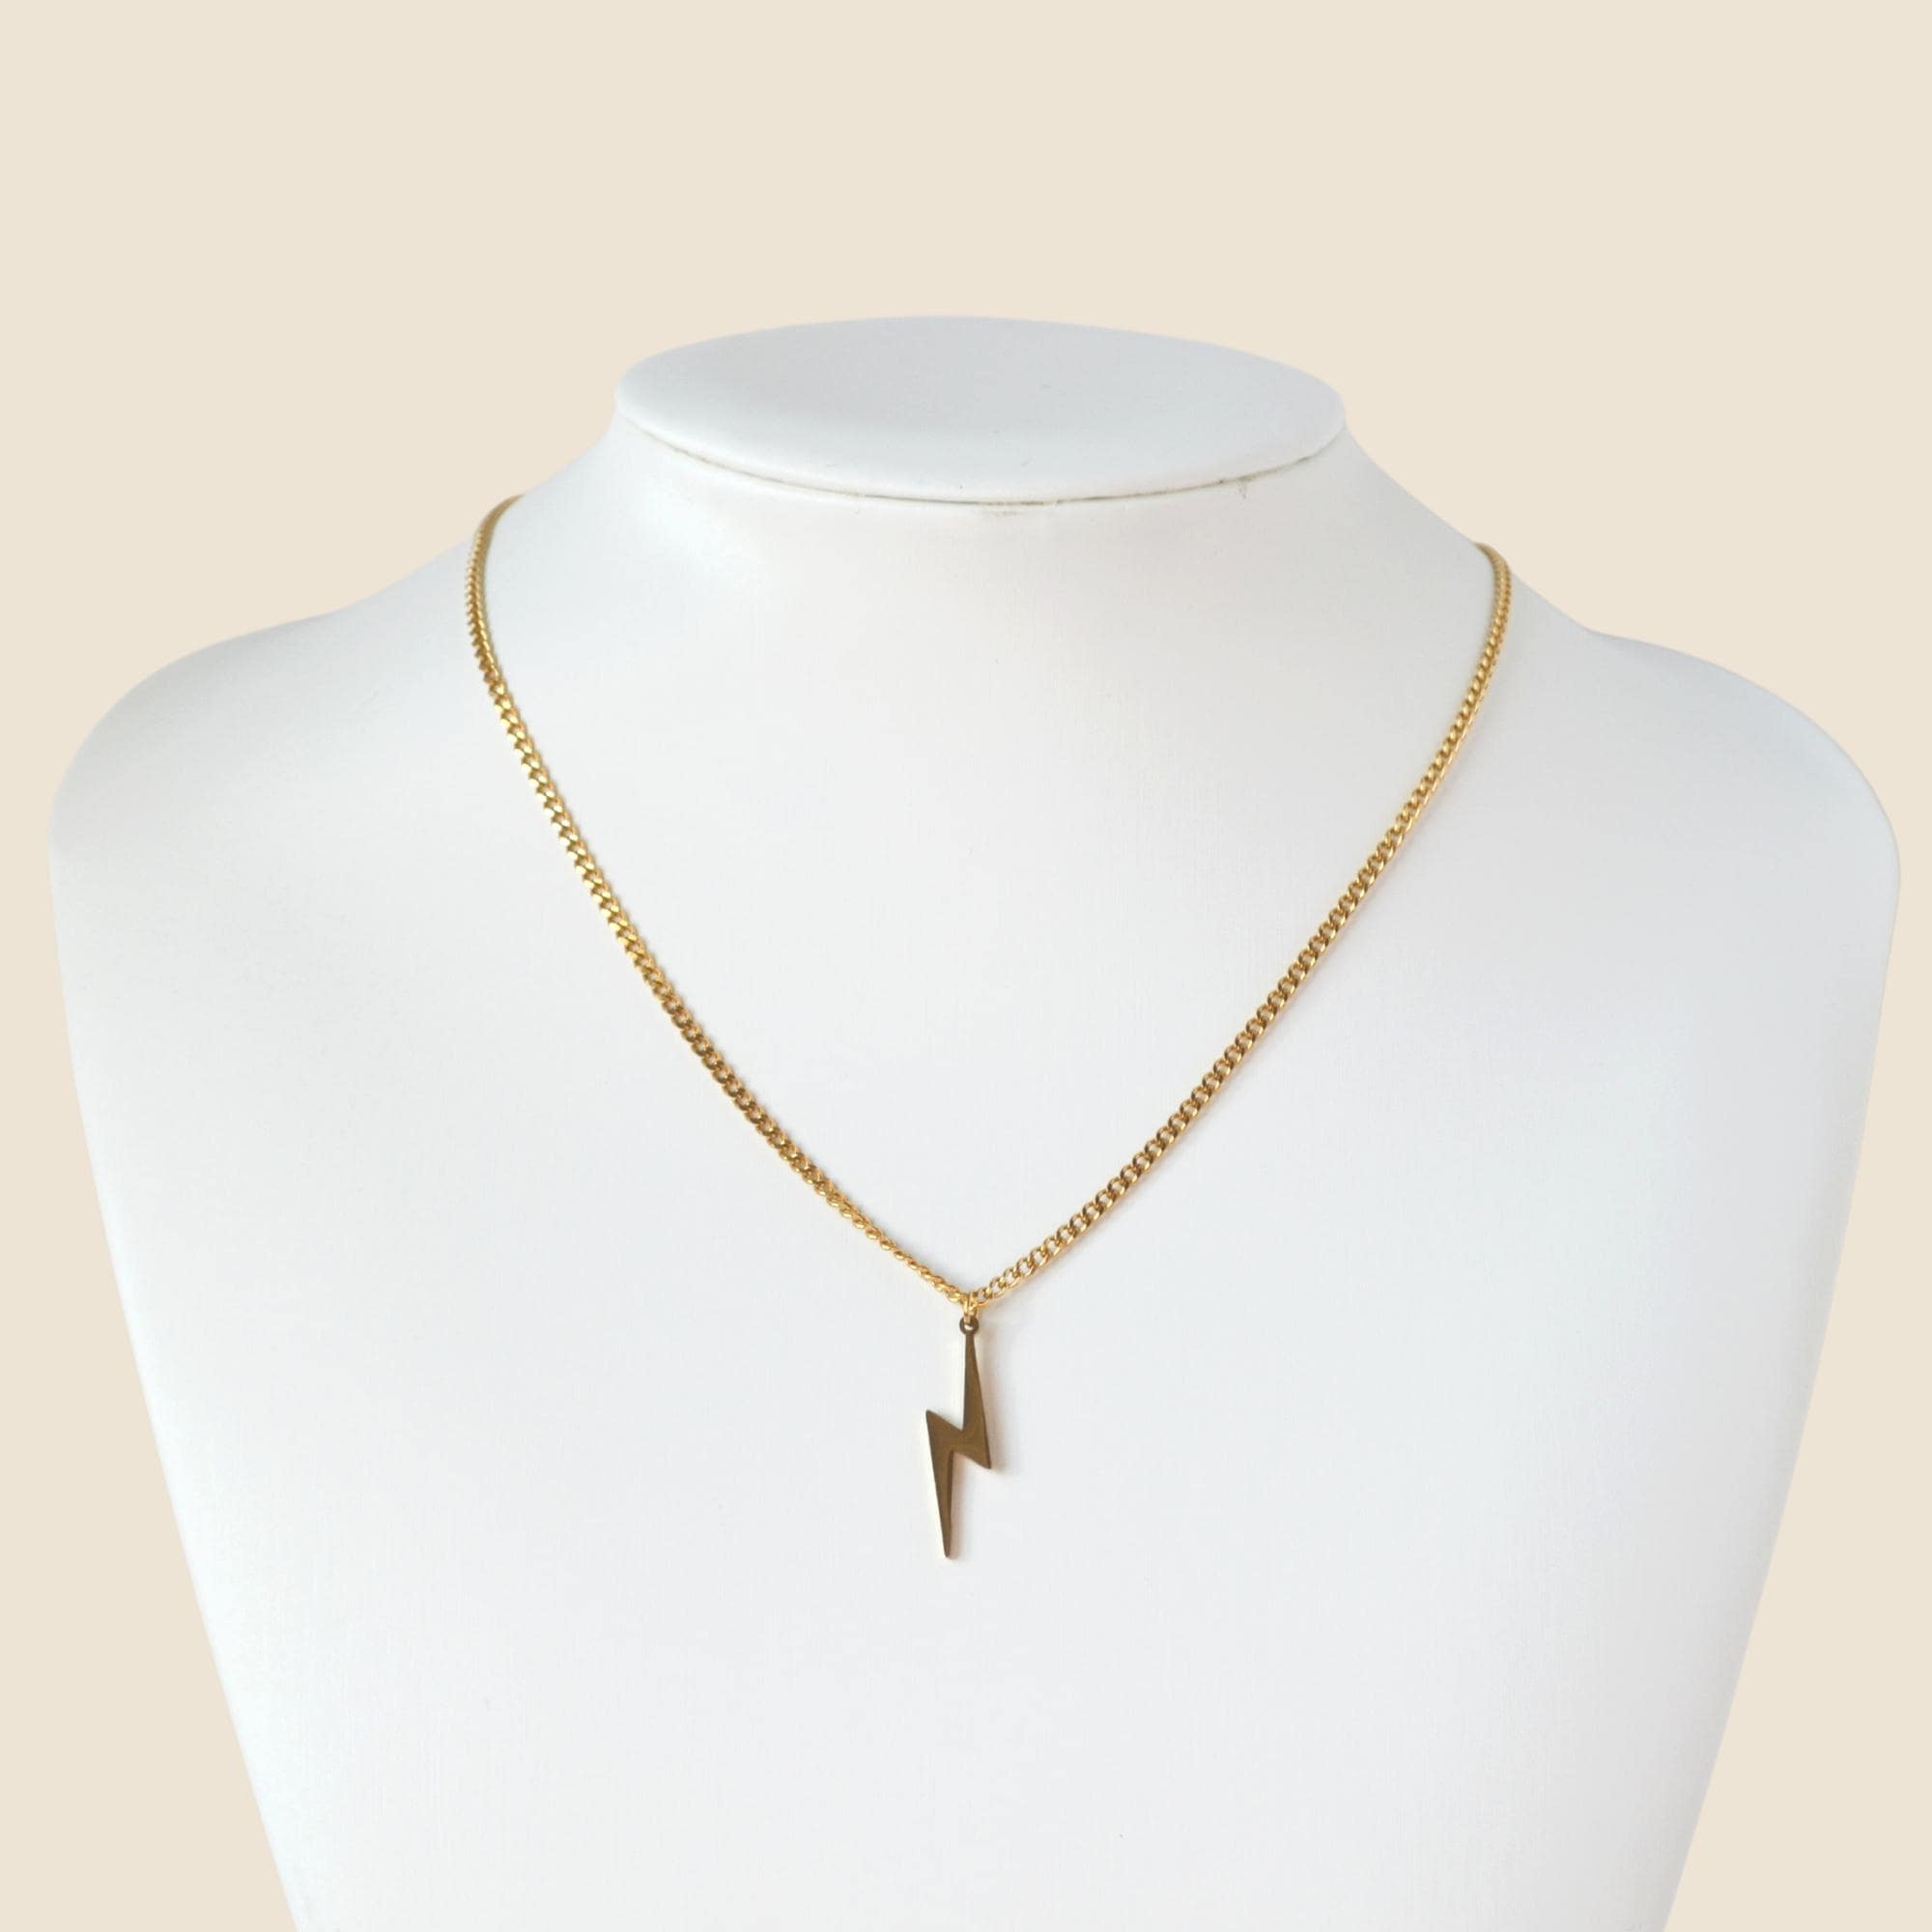 Buy Yfe Thunder Necklace Lightning Bolt Necklace Minimalist Choker for  Women and Girls Jewelry Gifts Lightning Charm (Gold) at Amazon.in